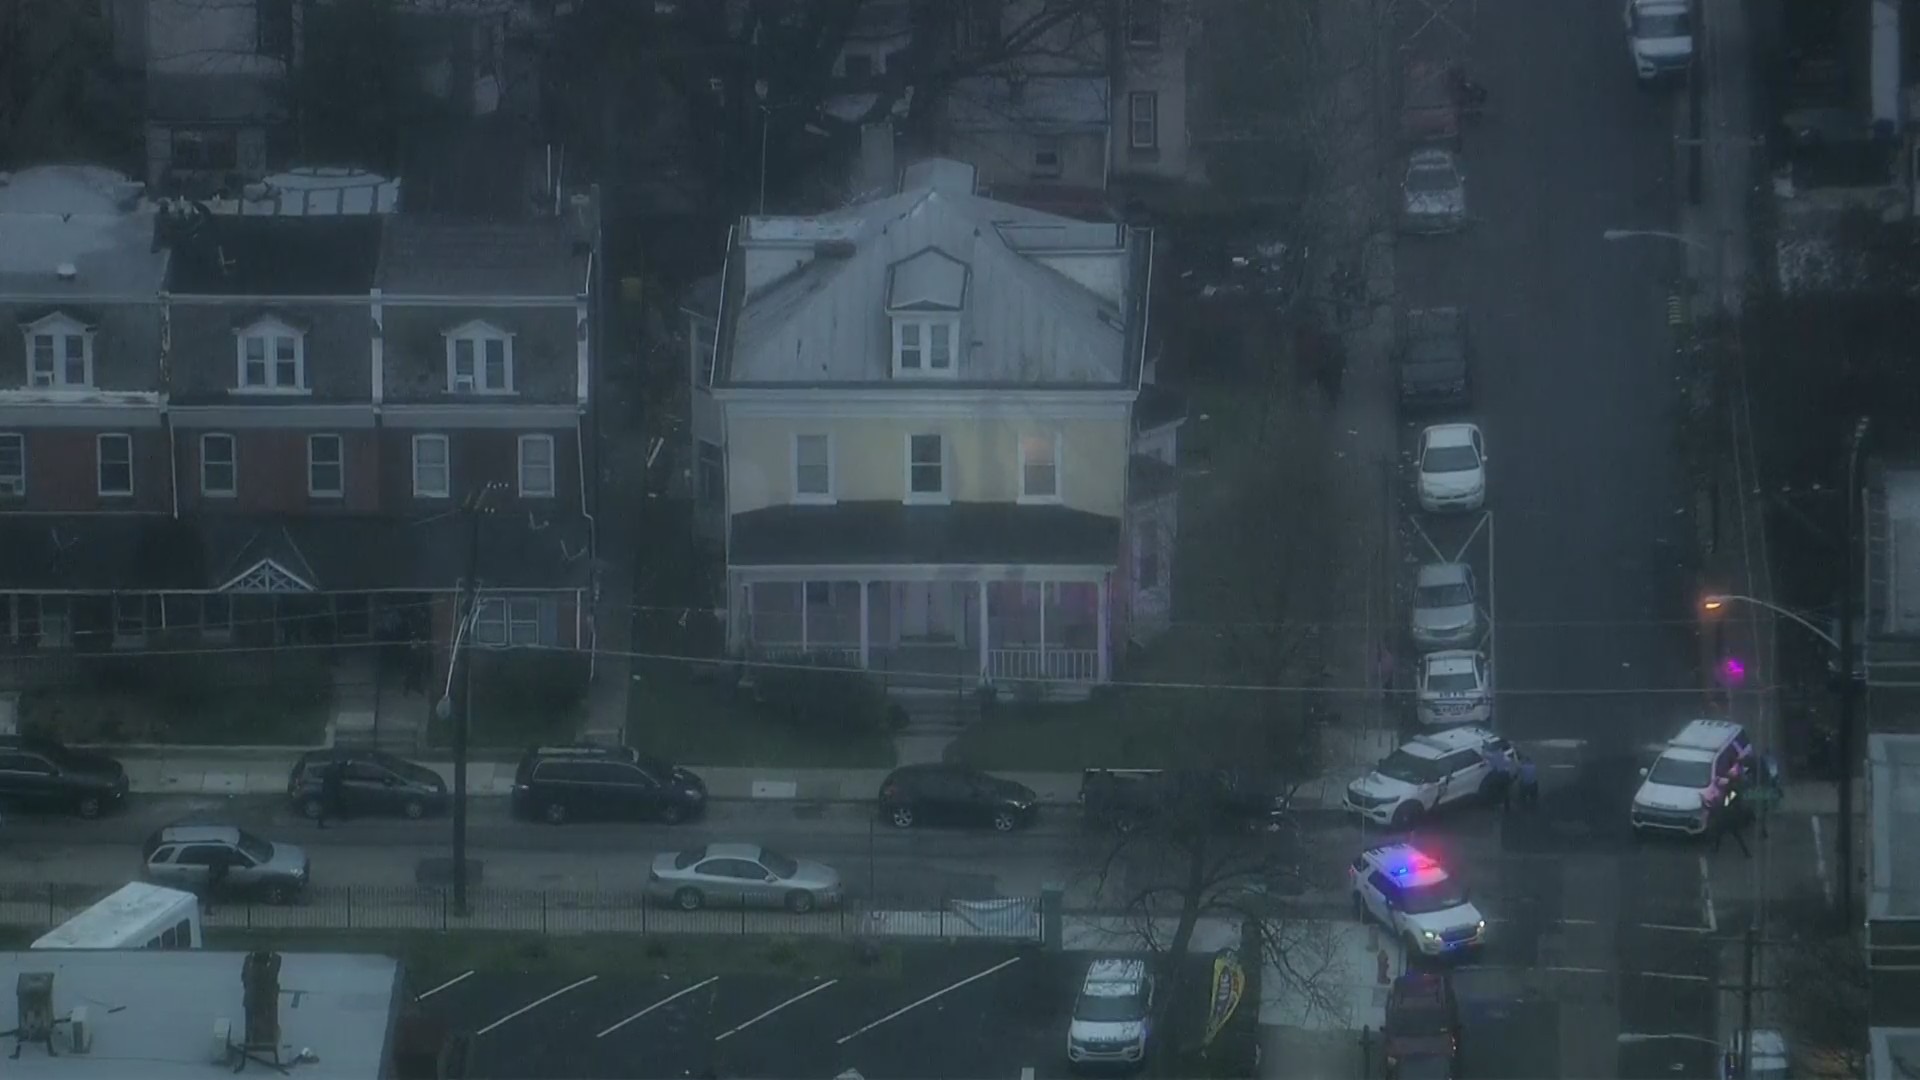 Gunman dead after SEPTA Transit officer and 3 others were shot in Frankford section of Philadelphia, police say – CBS Philly